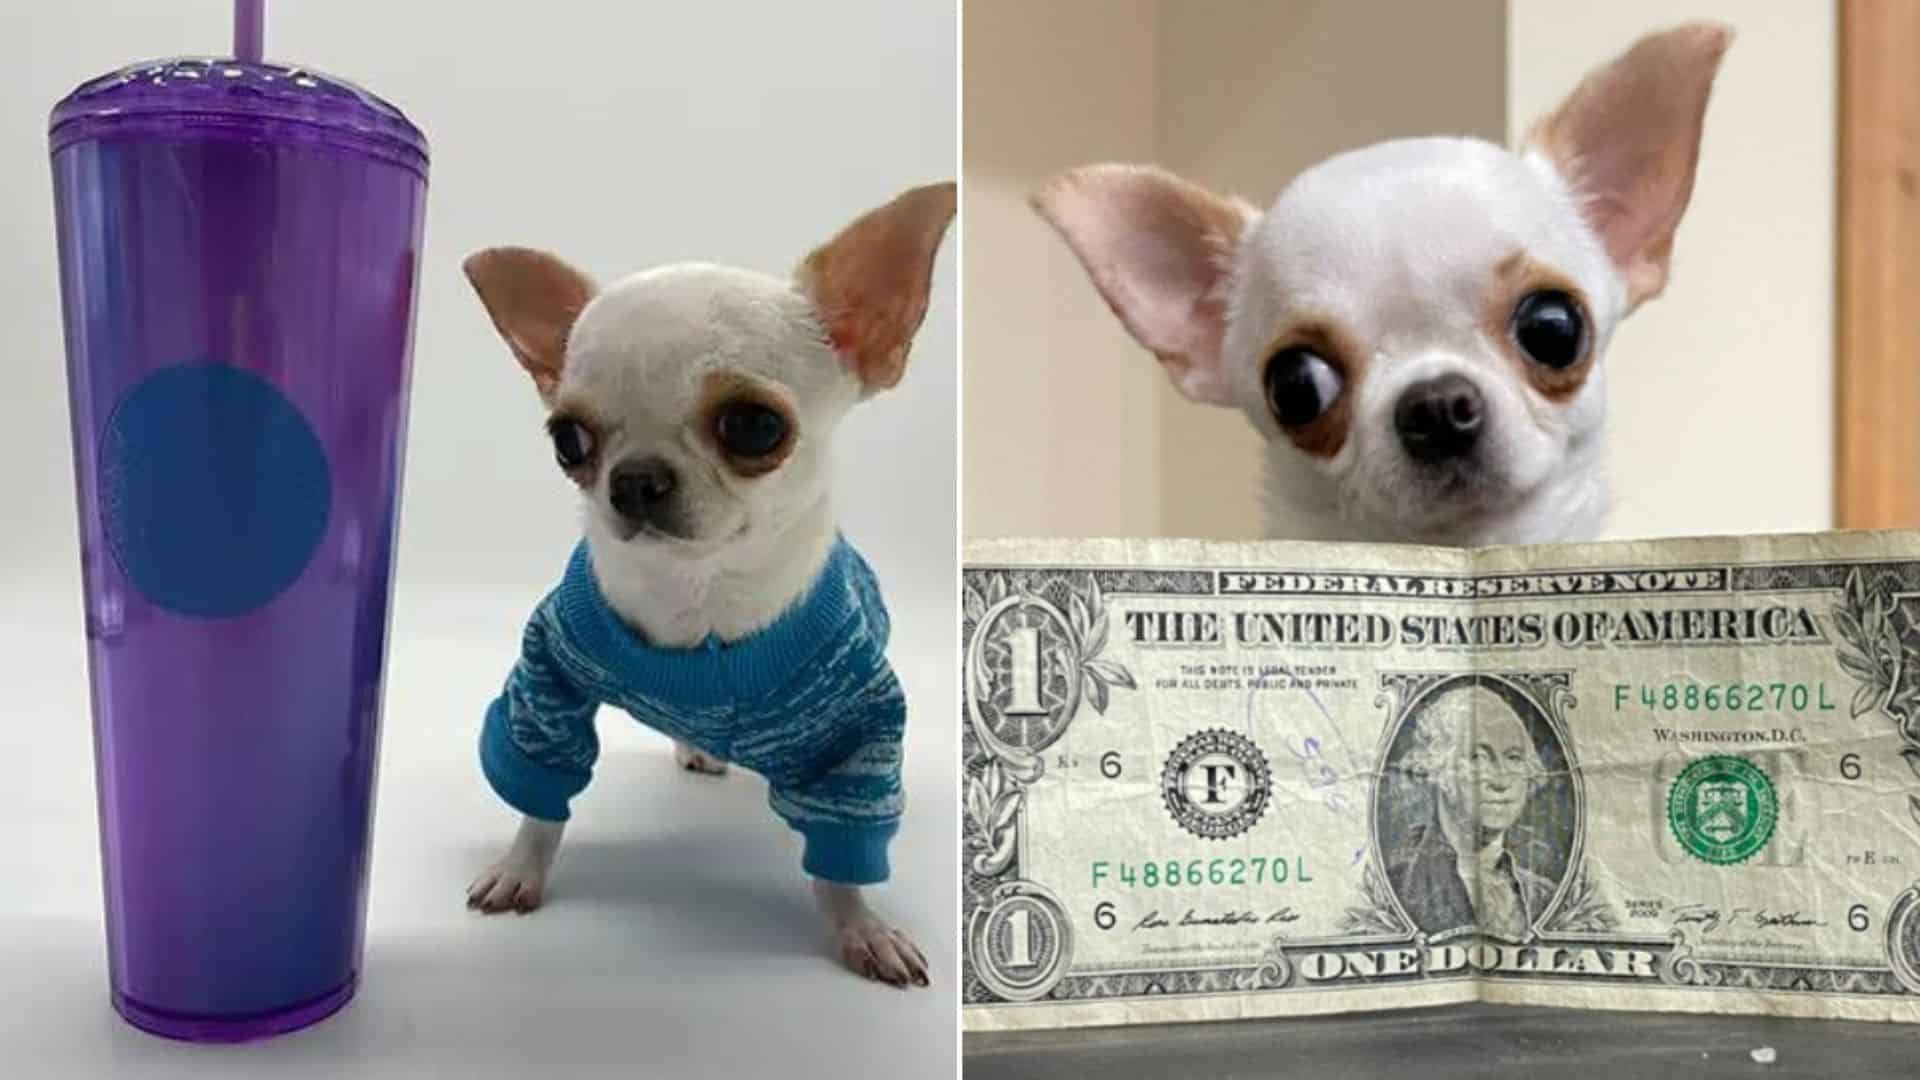 It’s Official, Pearl Is The World’s Tiniest Dog Weighing Only 1.22 Pounds